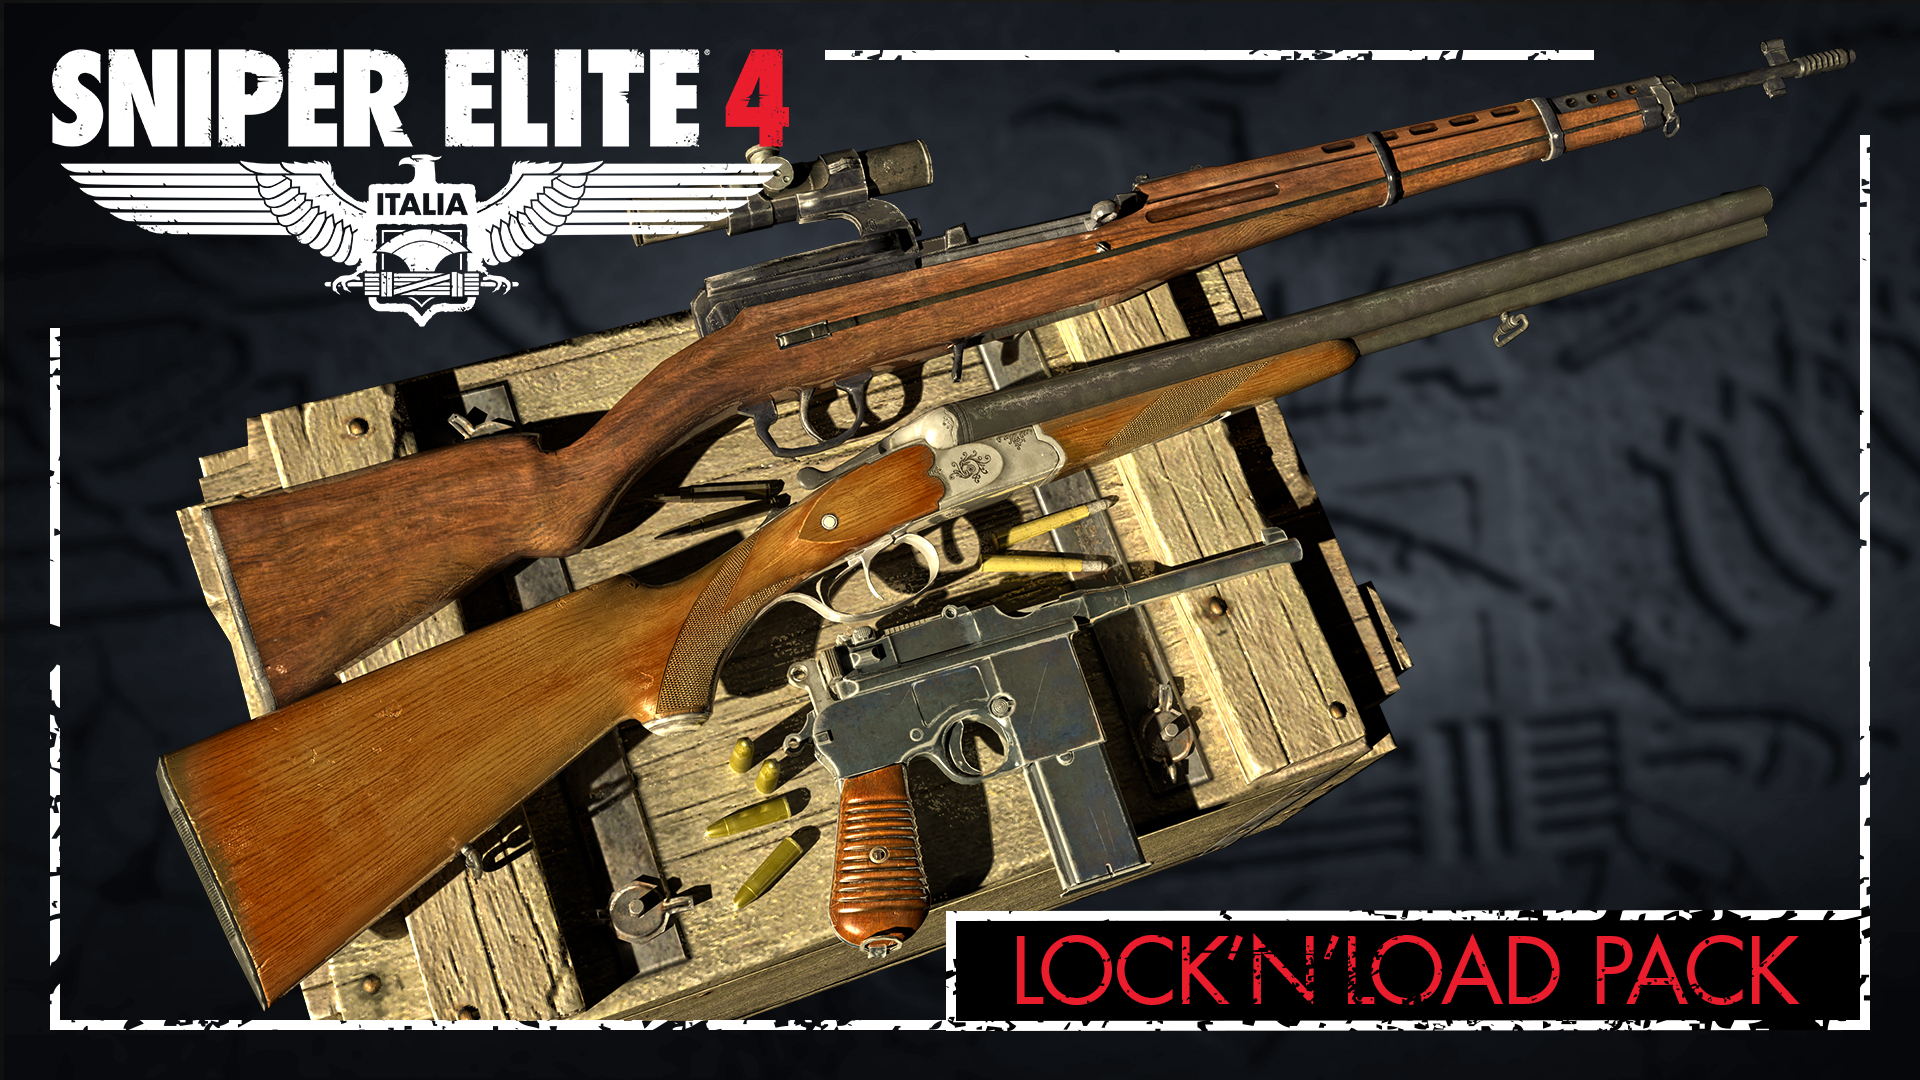 Sniper Elite 4 - Lock and Load Weapons Pack DLC Steam CD Key USD 4.51